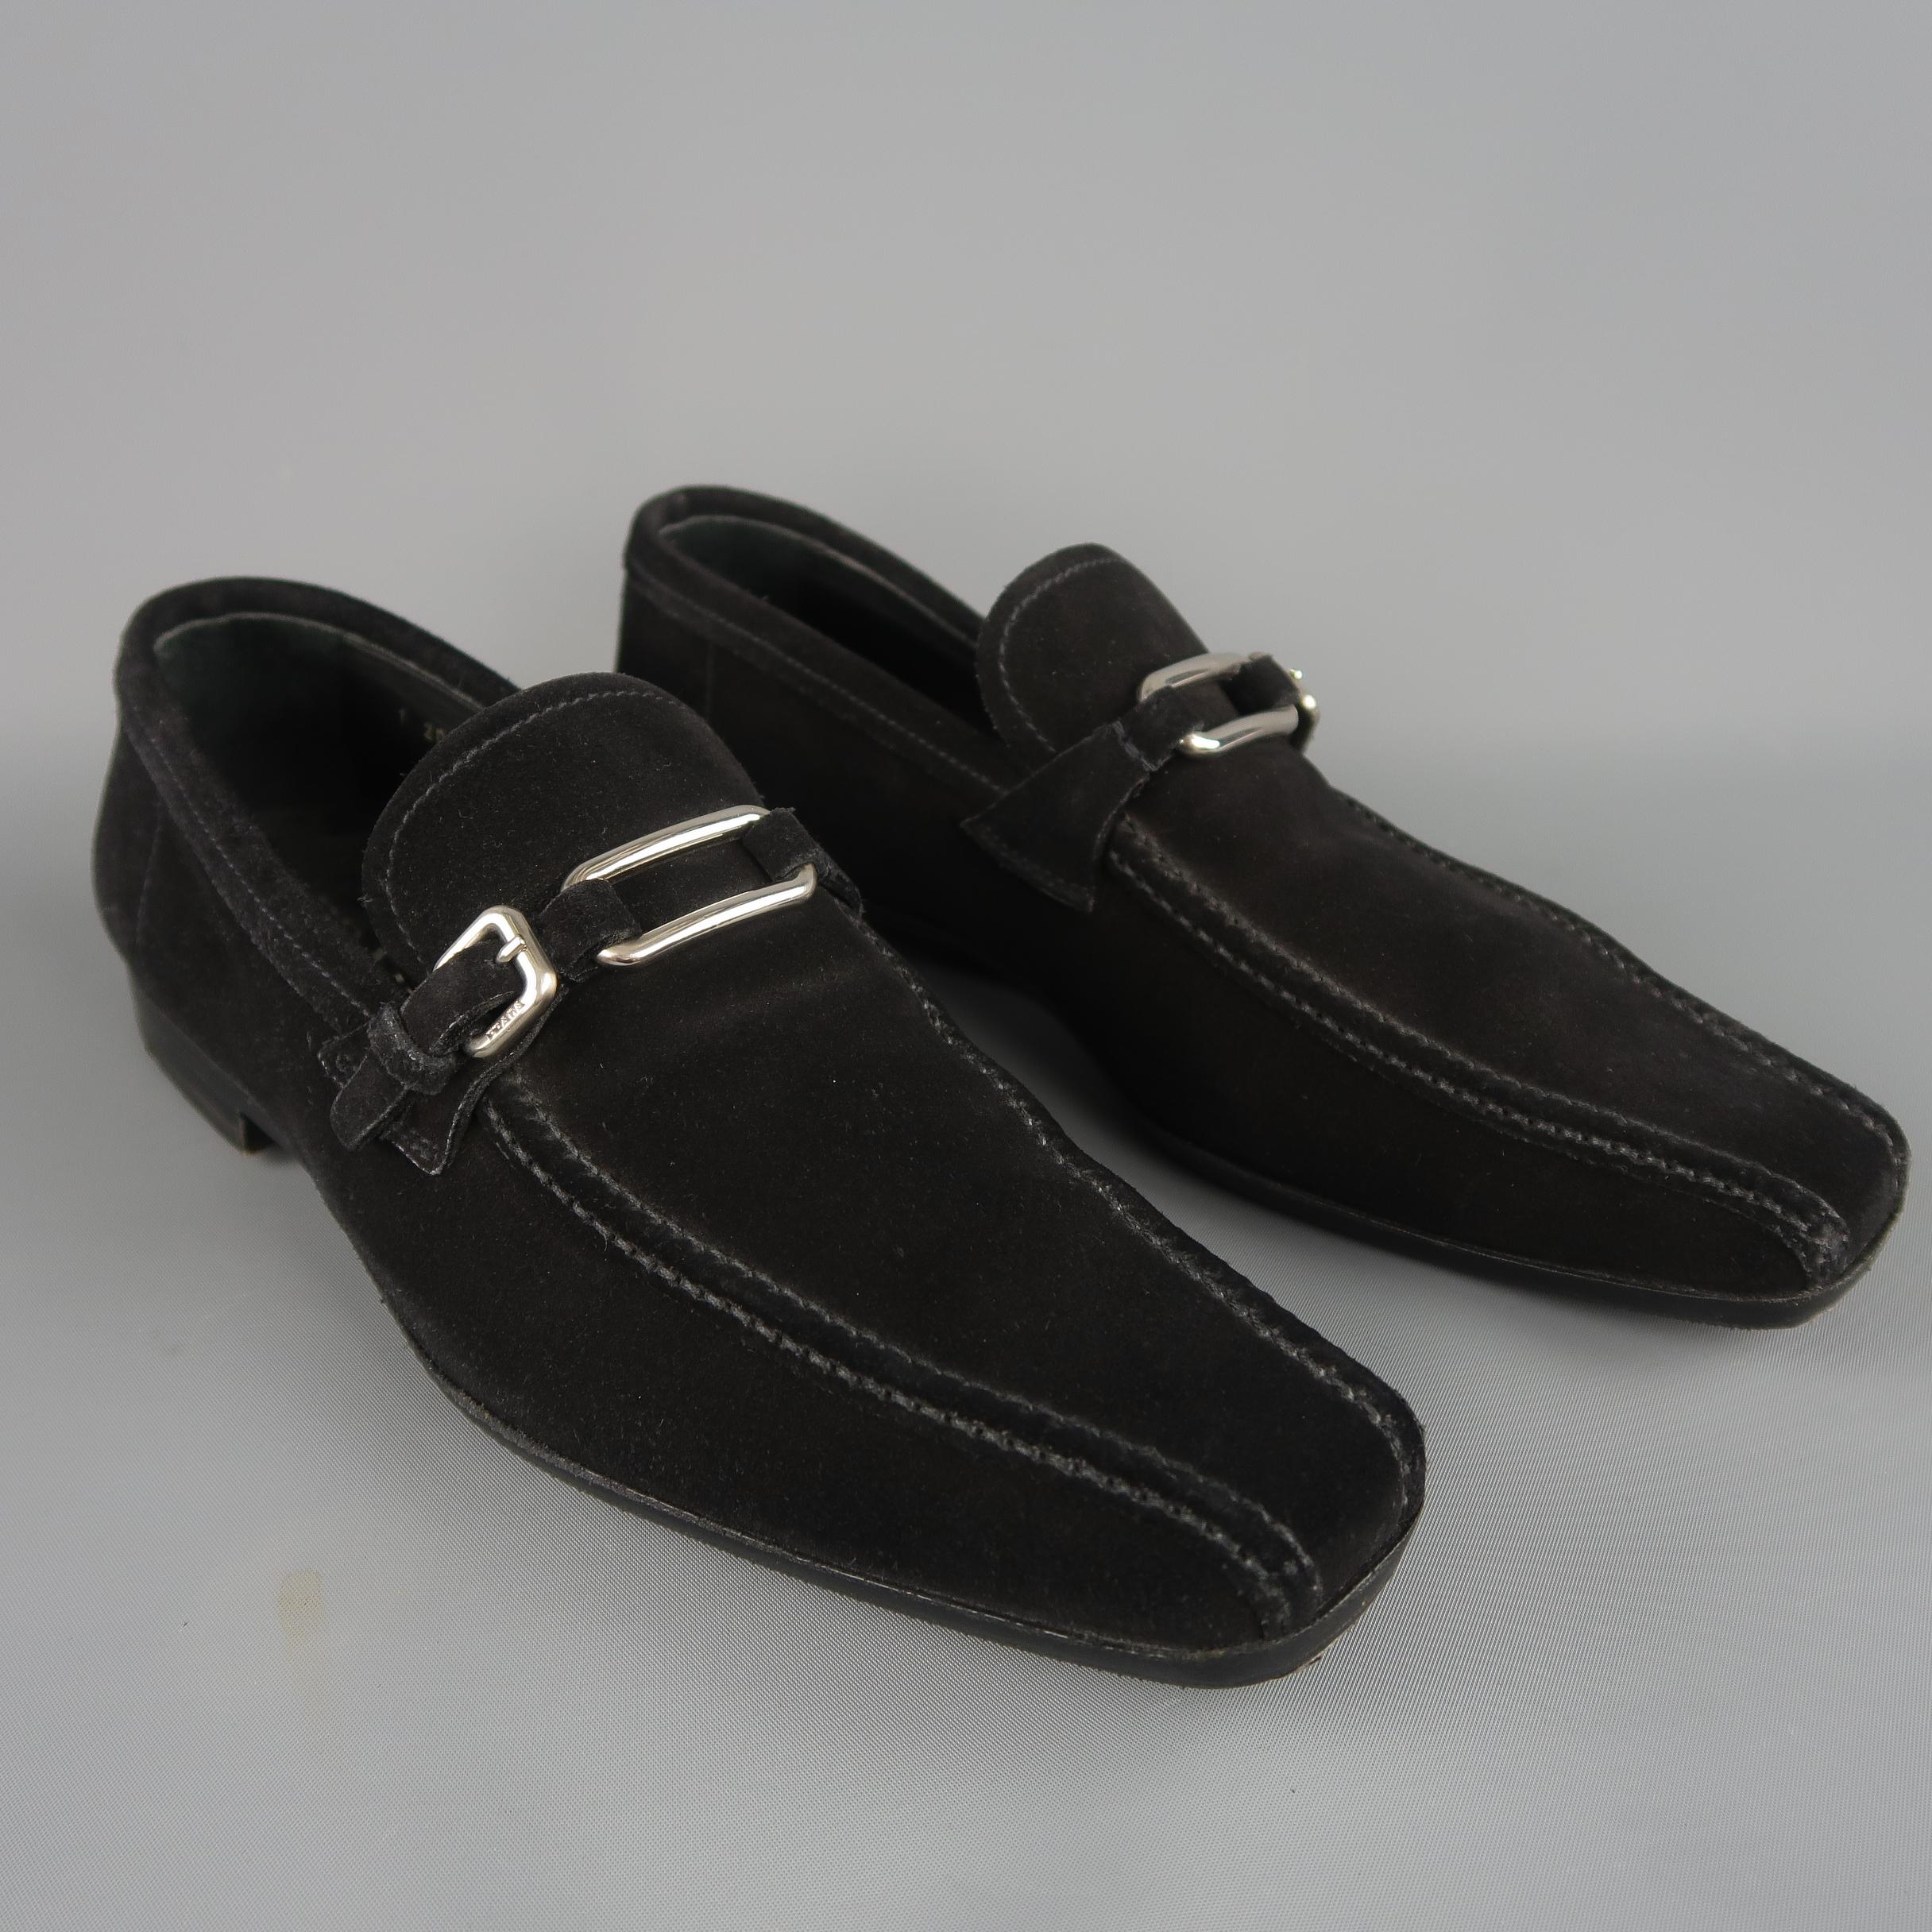 Vintage Prada loafers come in black suede with contrast stitching and a silver tone metal loop and buckle strap. Made in Italy.
 
Fair Pre-Owned Condition.
Marked: UK 6.5